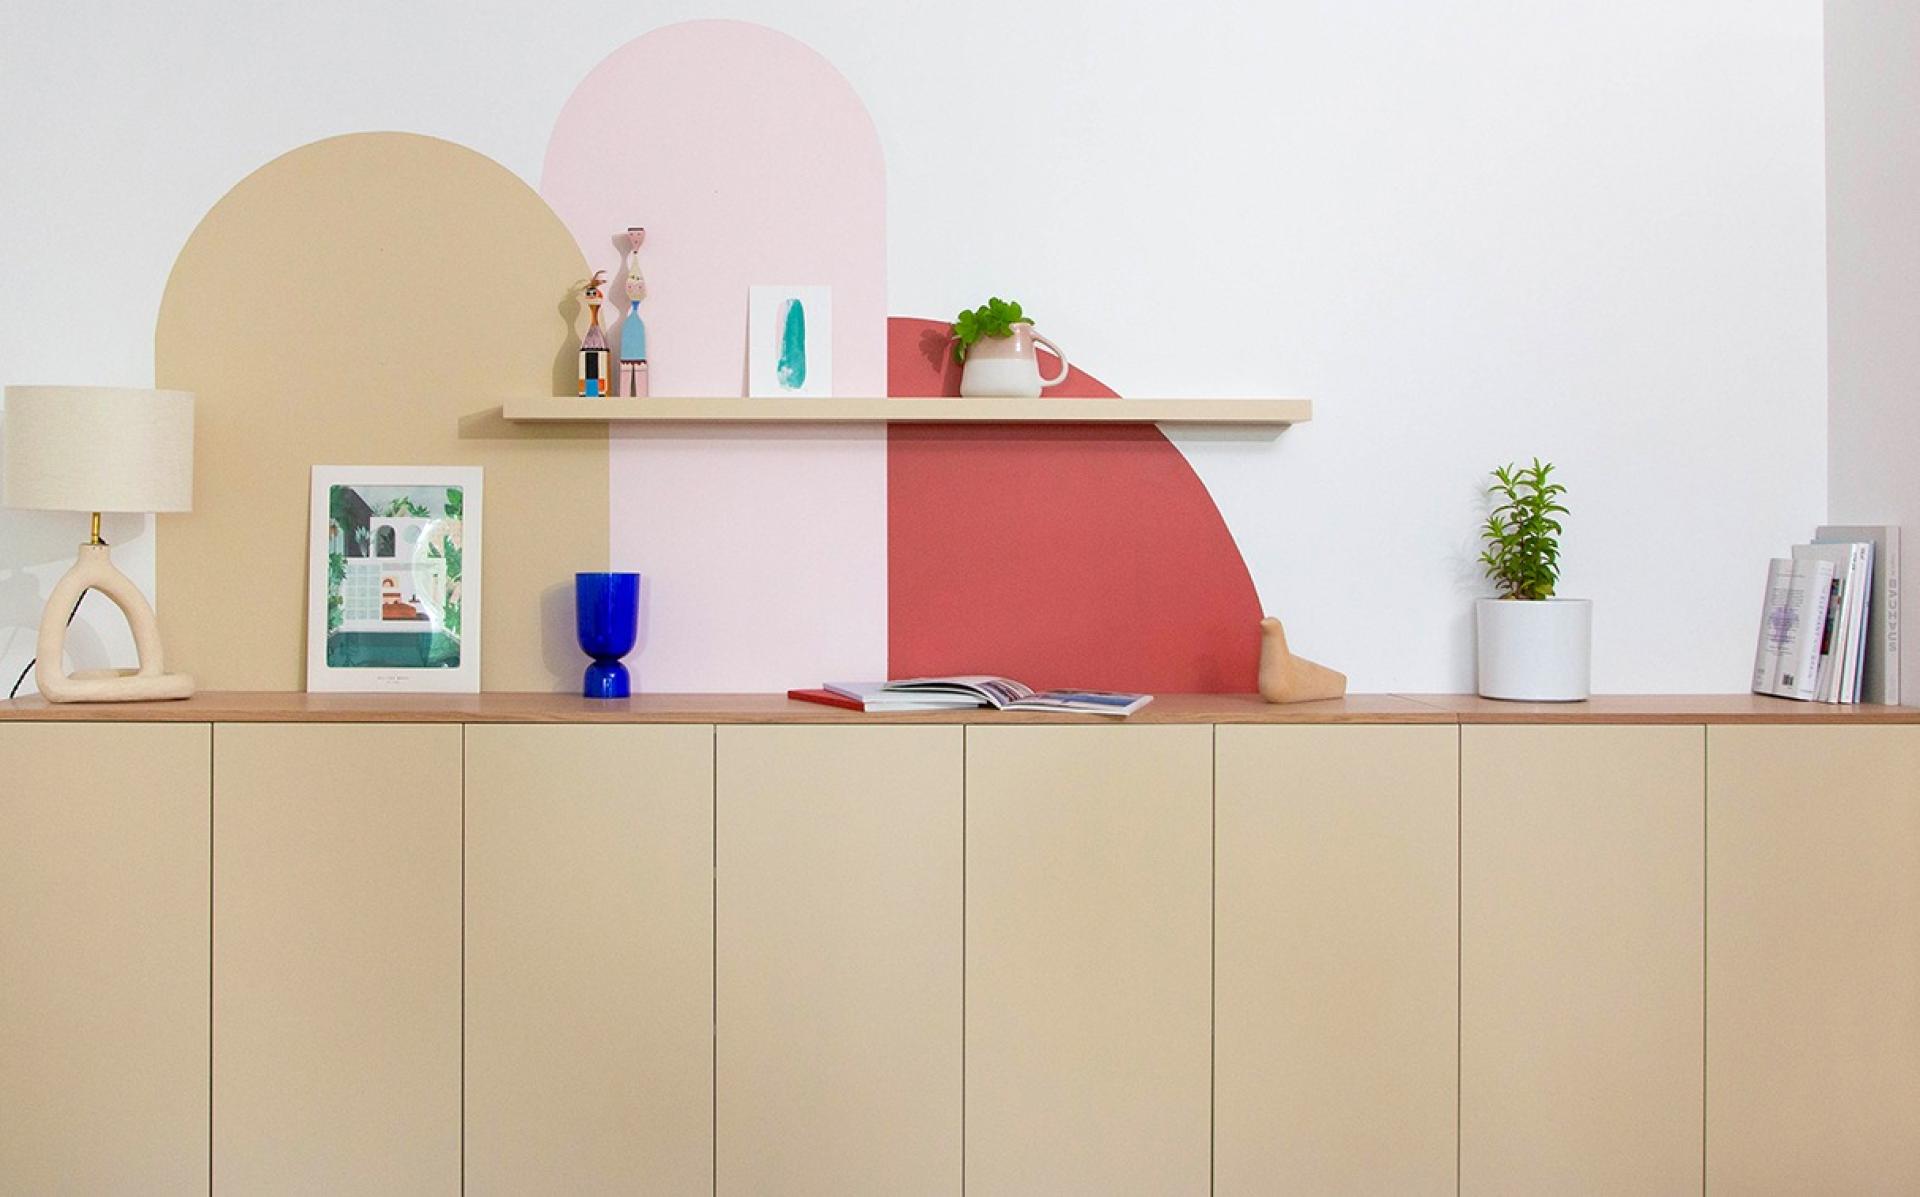 A Sable sideboard at Amandine & Nicolas' place